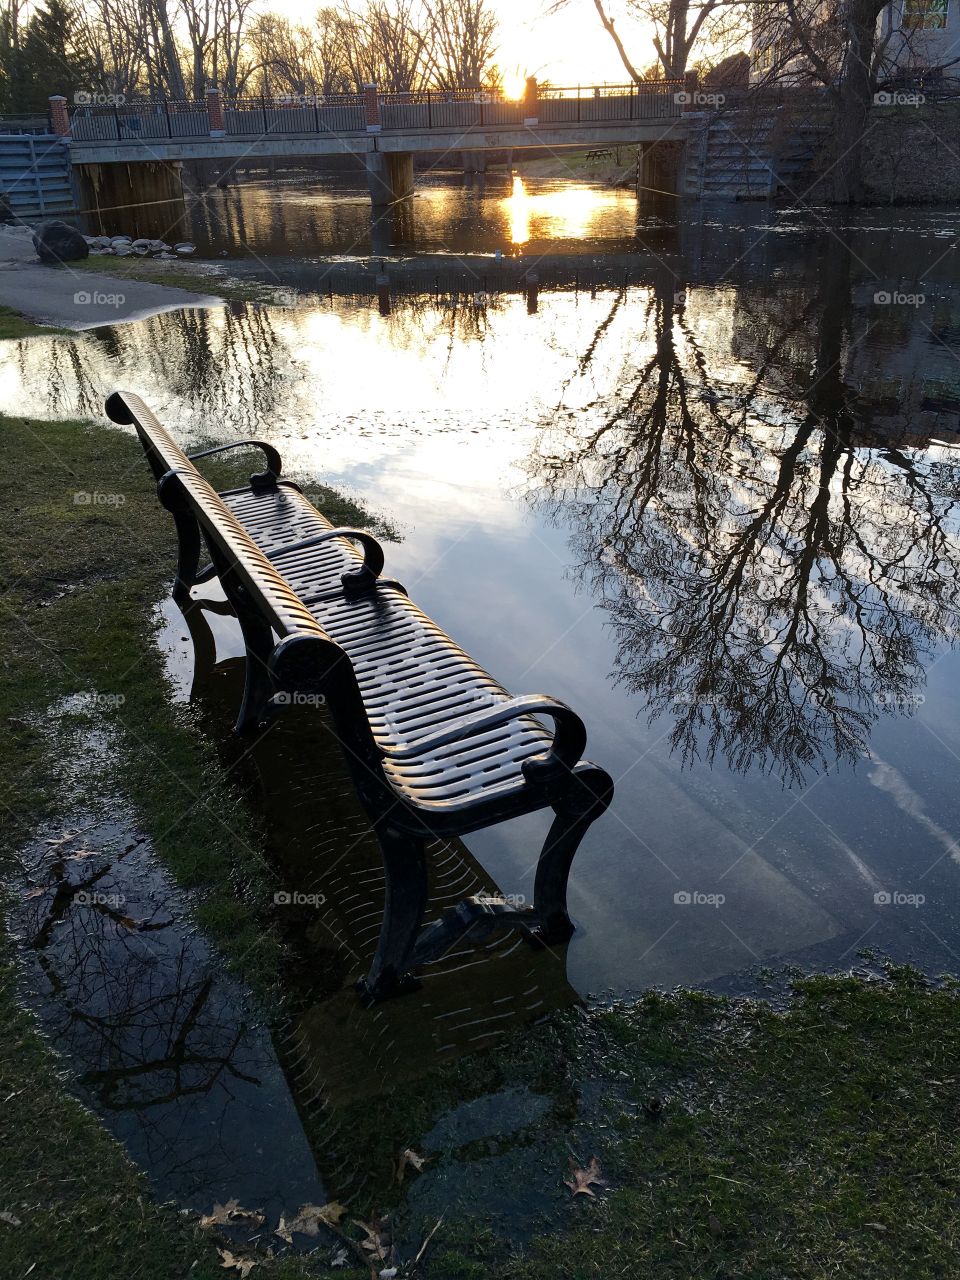 Park bench in River 